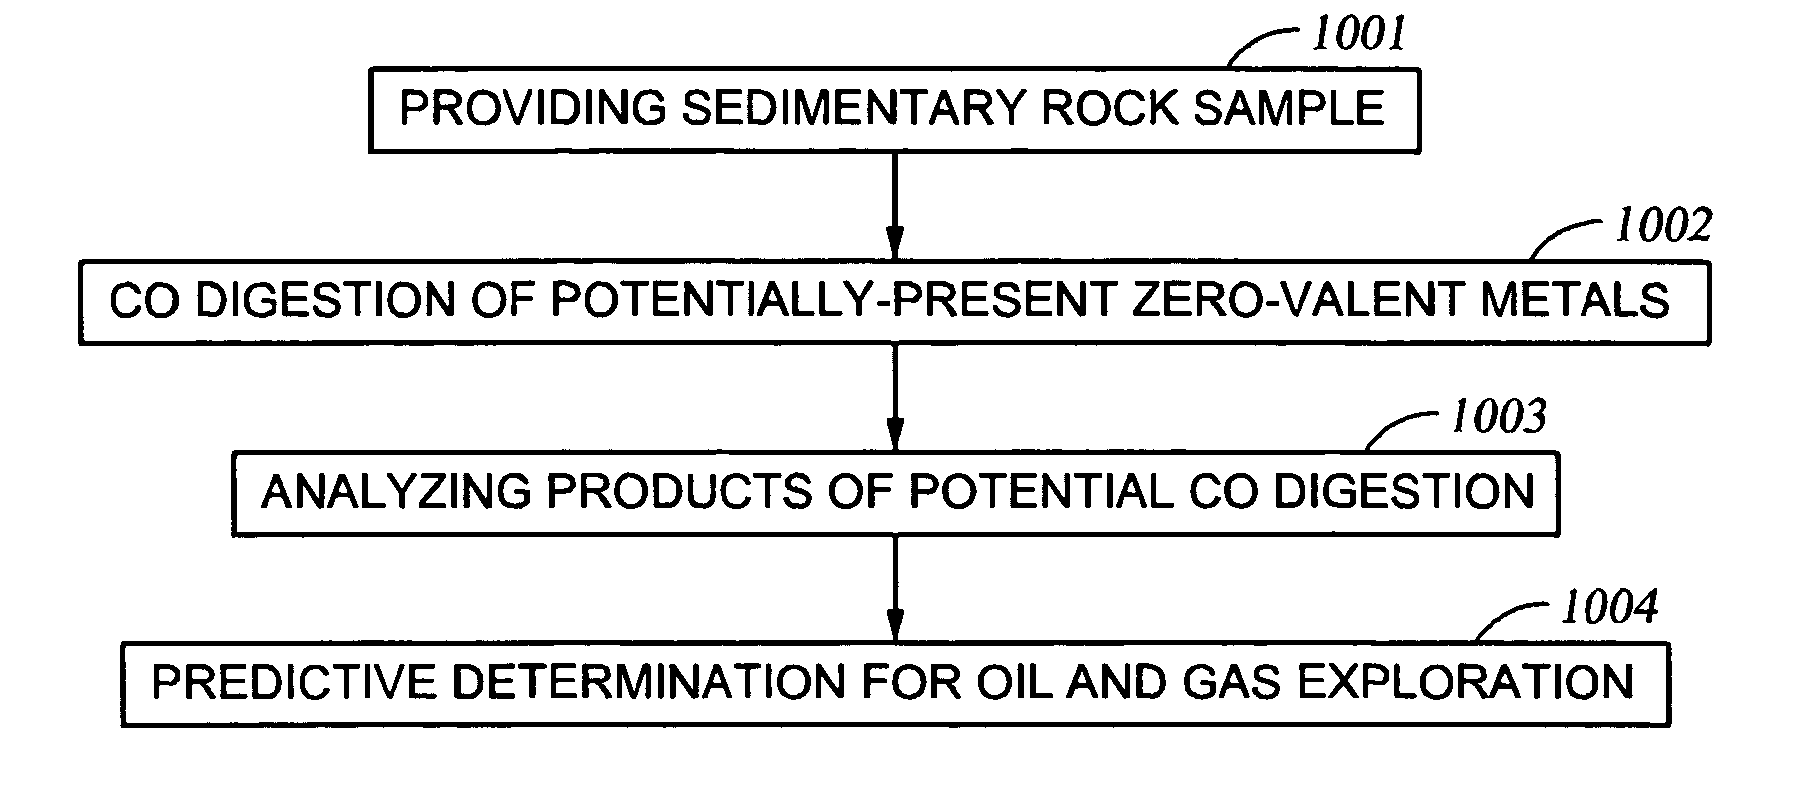 Assays for zero-valent transition metals in sedimentary rocks using carbon monoxide with application to oil and gas exploration